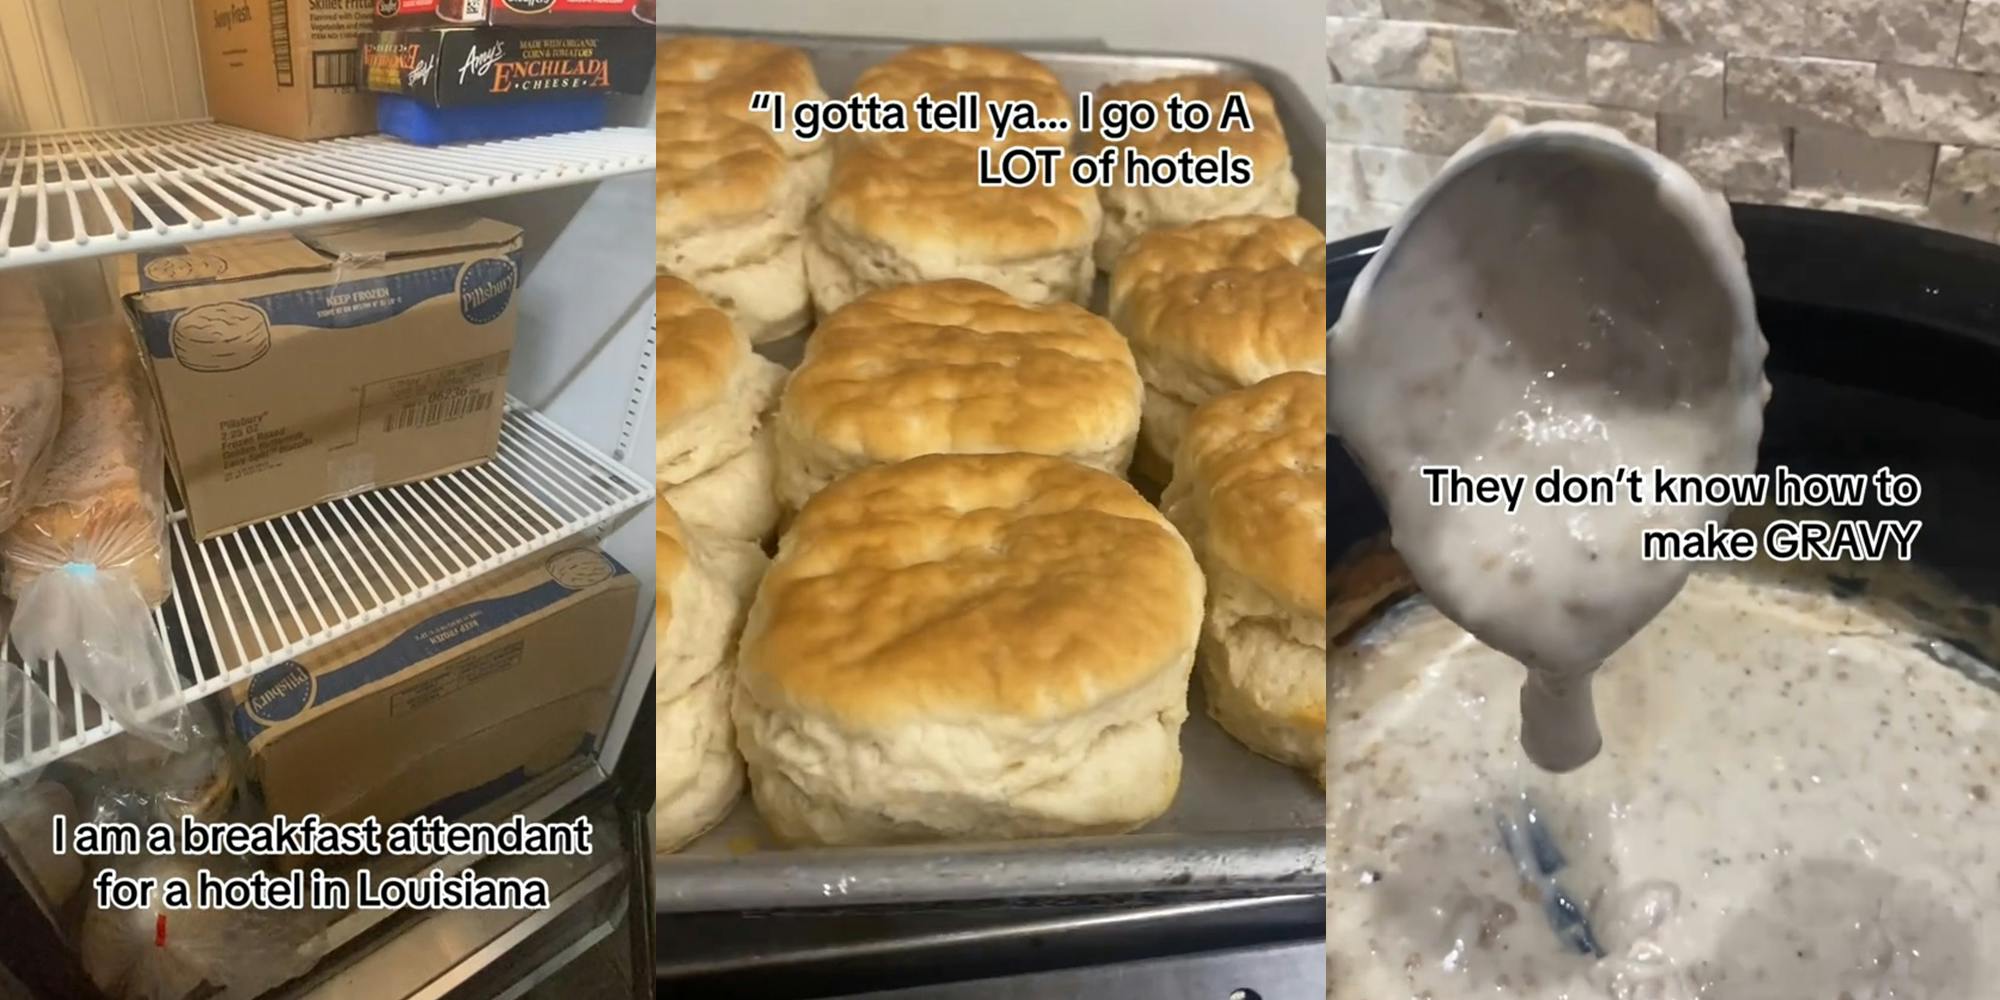 Hotel worker shares PSA about complimentary hotel breakfast